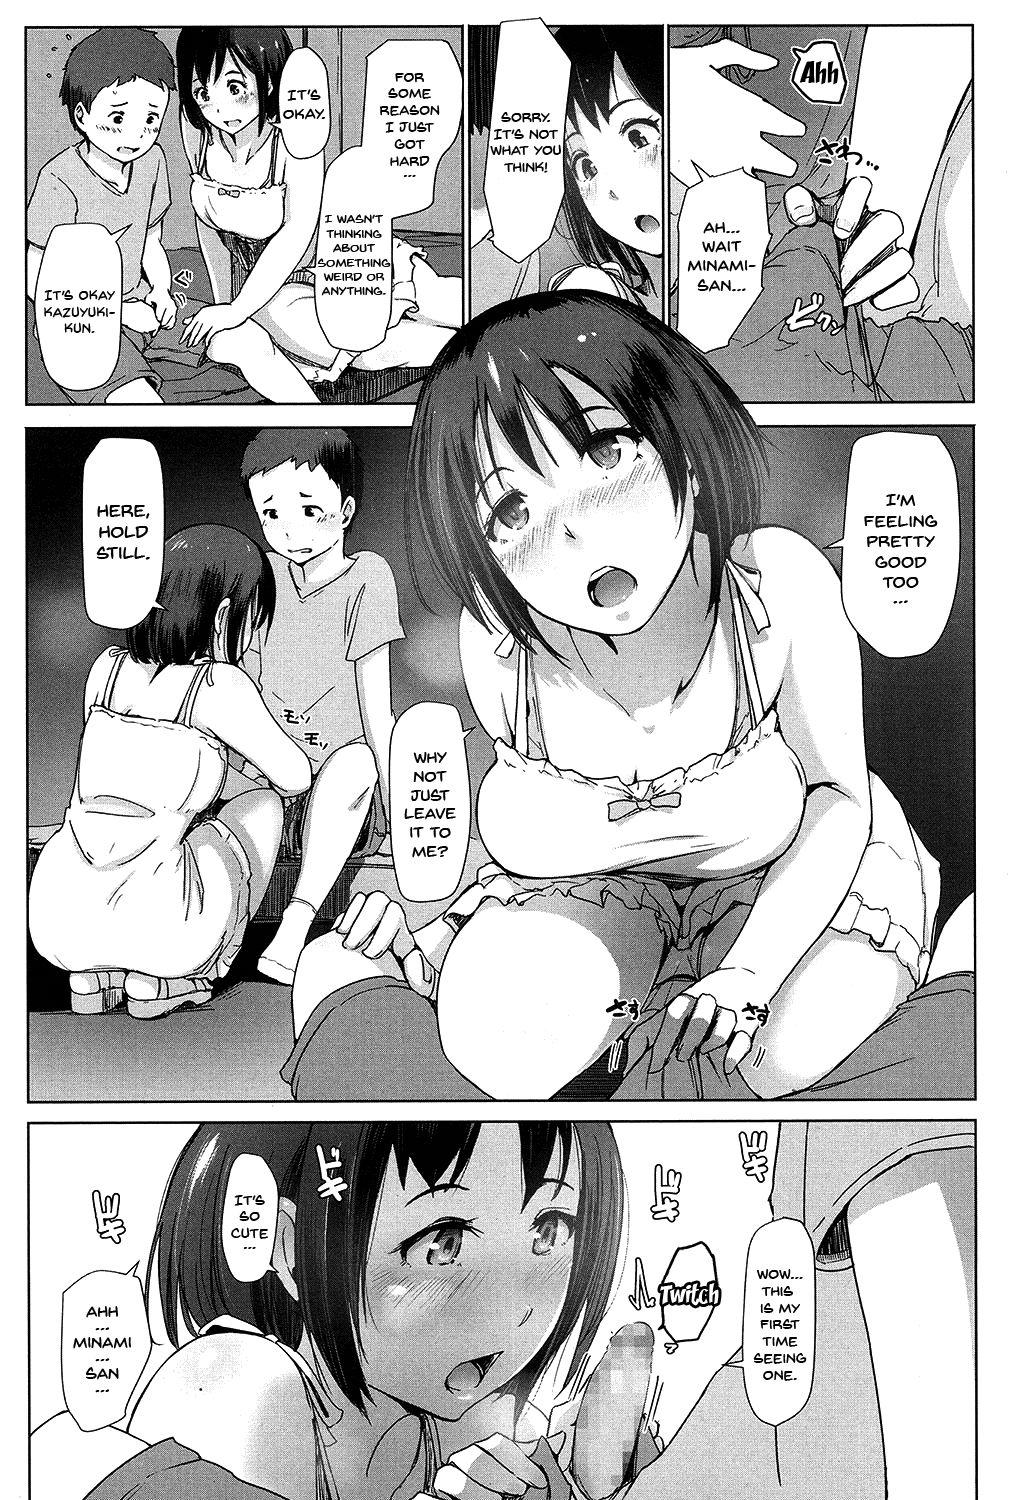 Atm Oji-san ni Sareta Natsuyasumi no Koto | Even If It's Your Uncle's House, Of Course You'd Get Fucked Wearing Those Clothes Milf Porn - Page 5